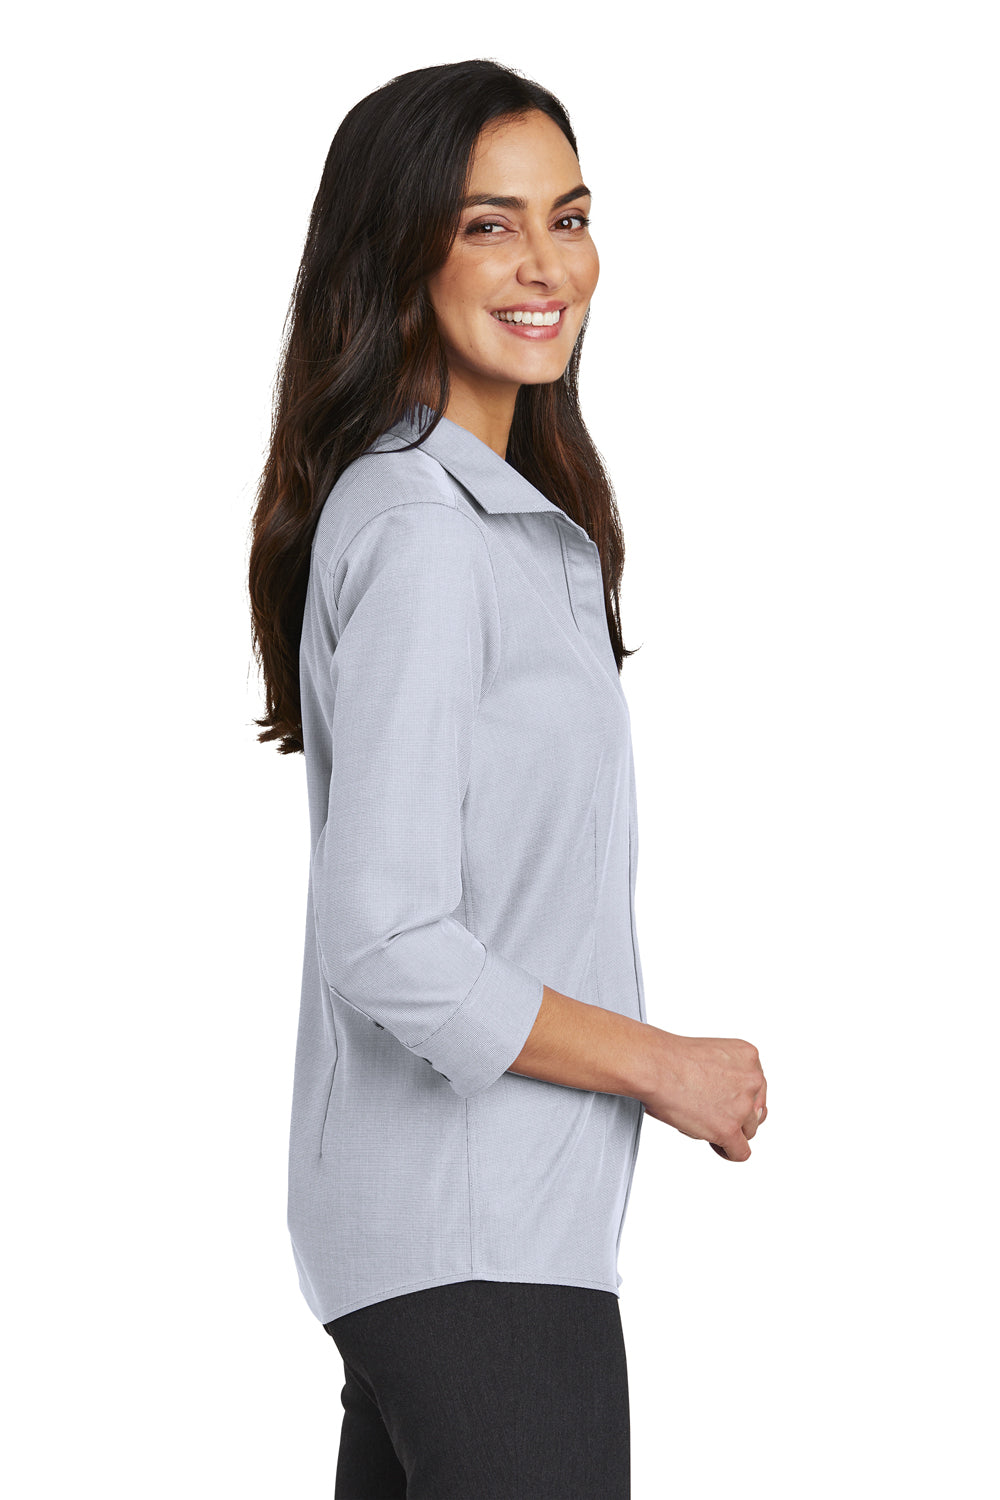 Red House RH690 Womens Nailhead Wrinkle Resistant 3/4 Sleeve Button Down Shirt Ice Grey Side